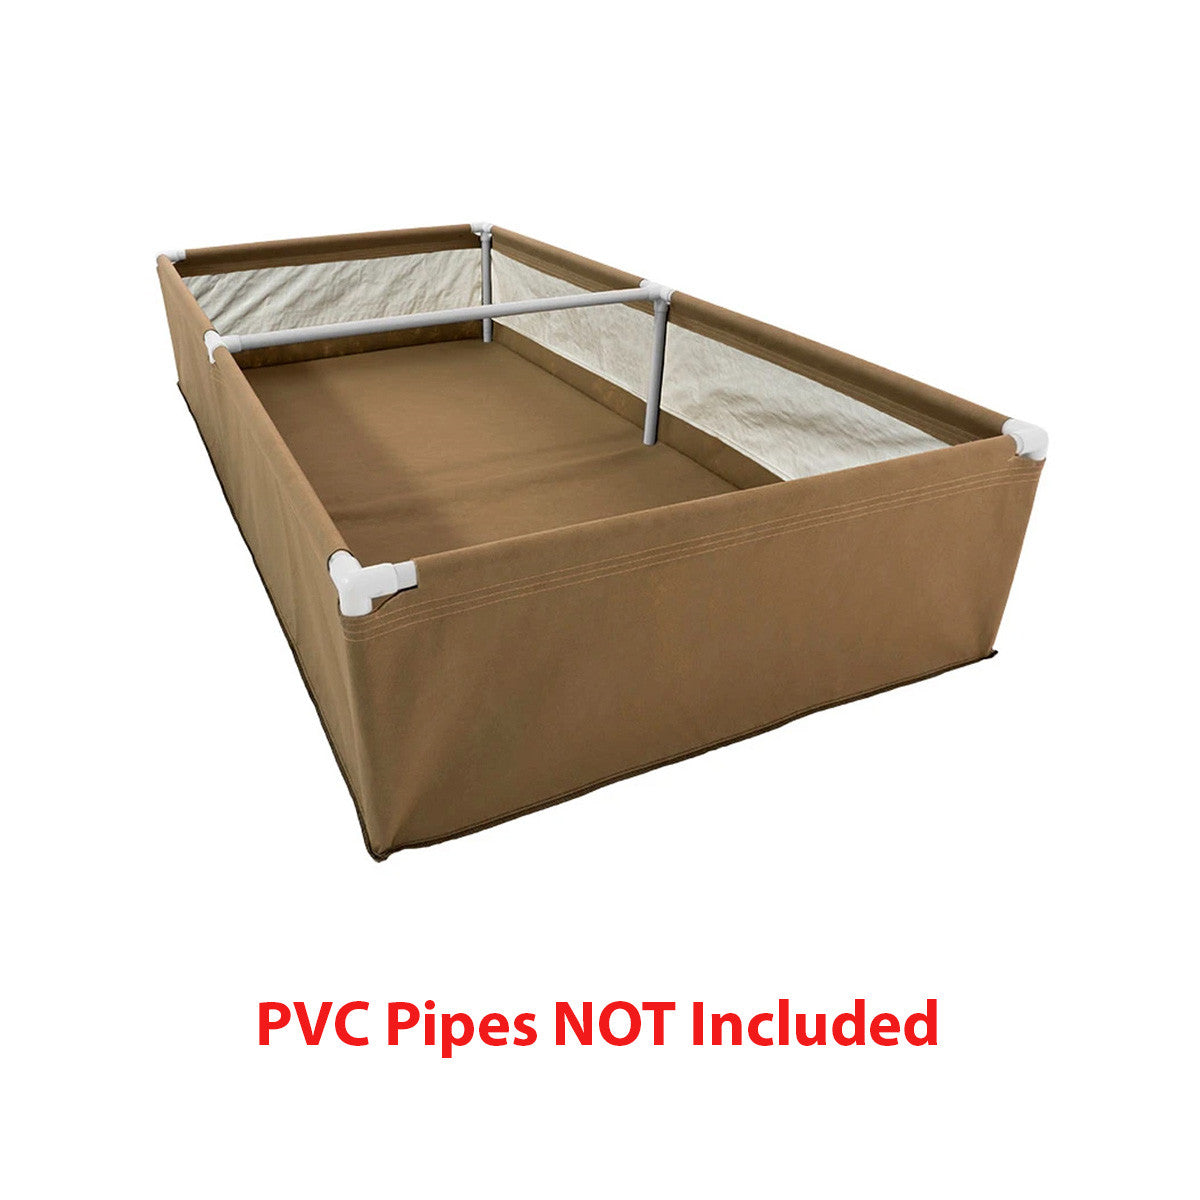 Grassroots Living Soil Fabric Beds (1" PVC PIPE NOT INCLUDED)